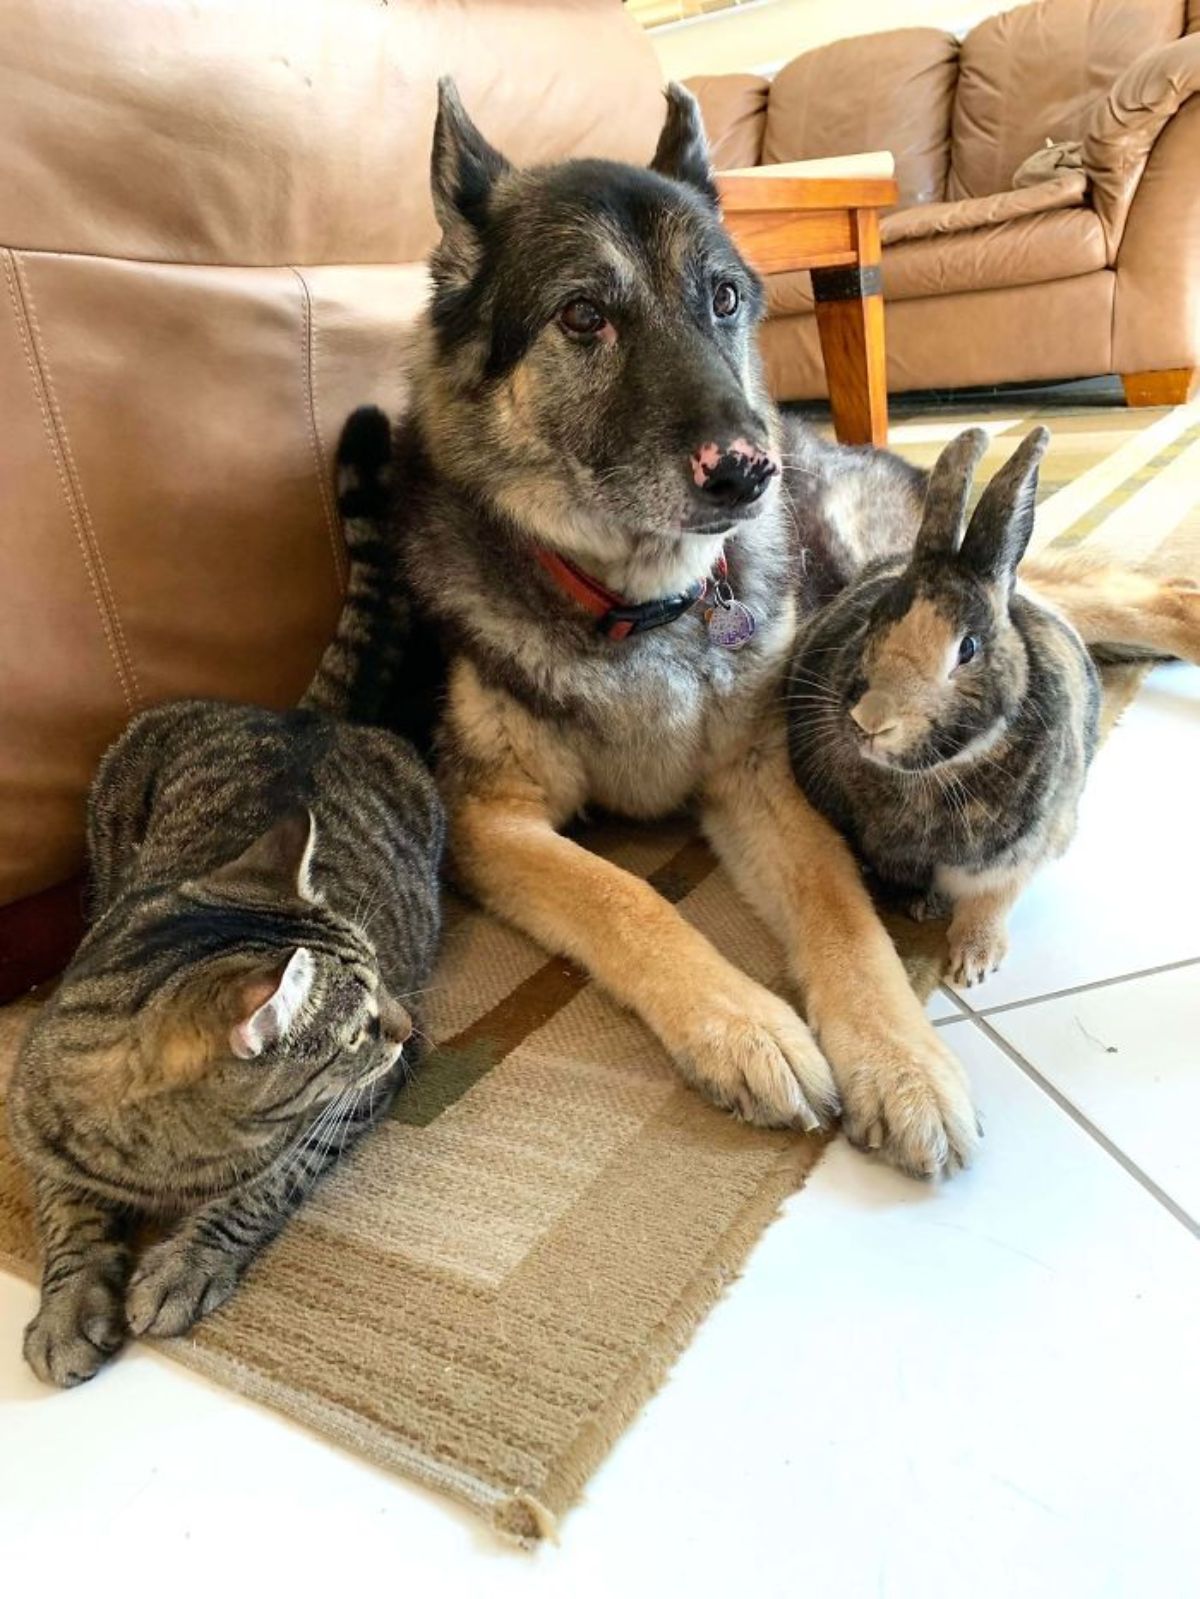 grey tabby laying next to a german shepherd and a brown and black rabbit